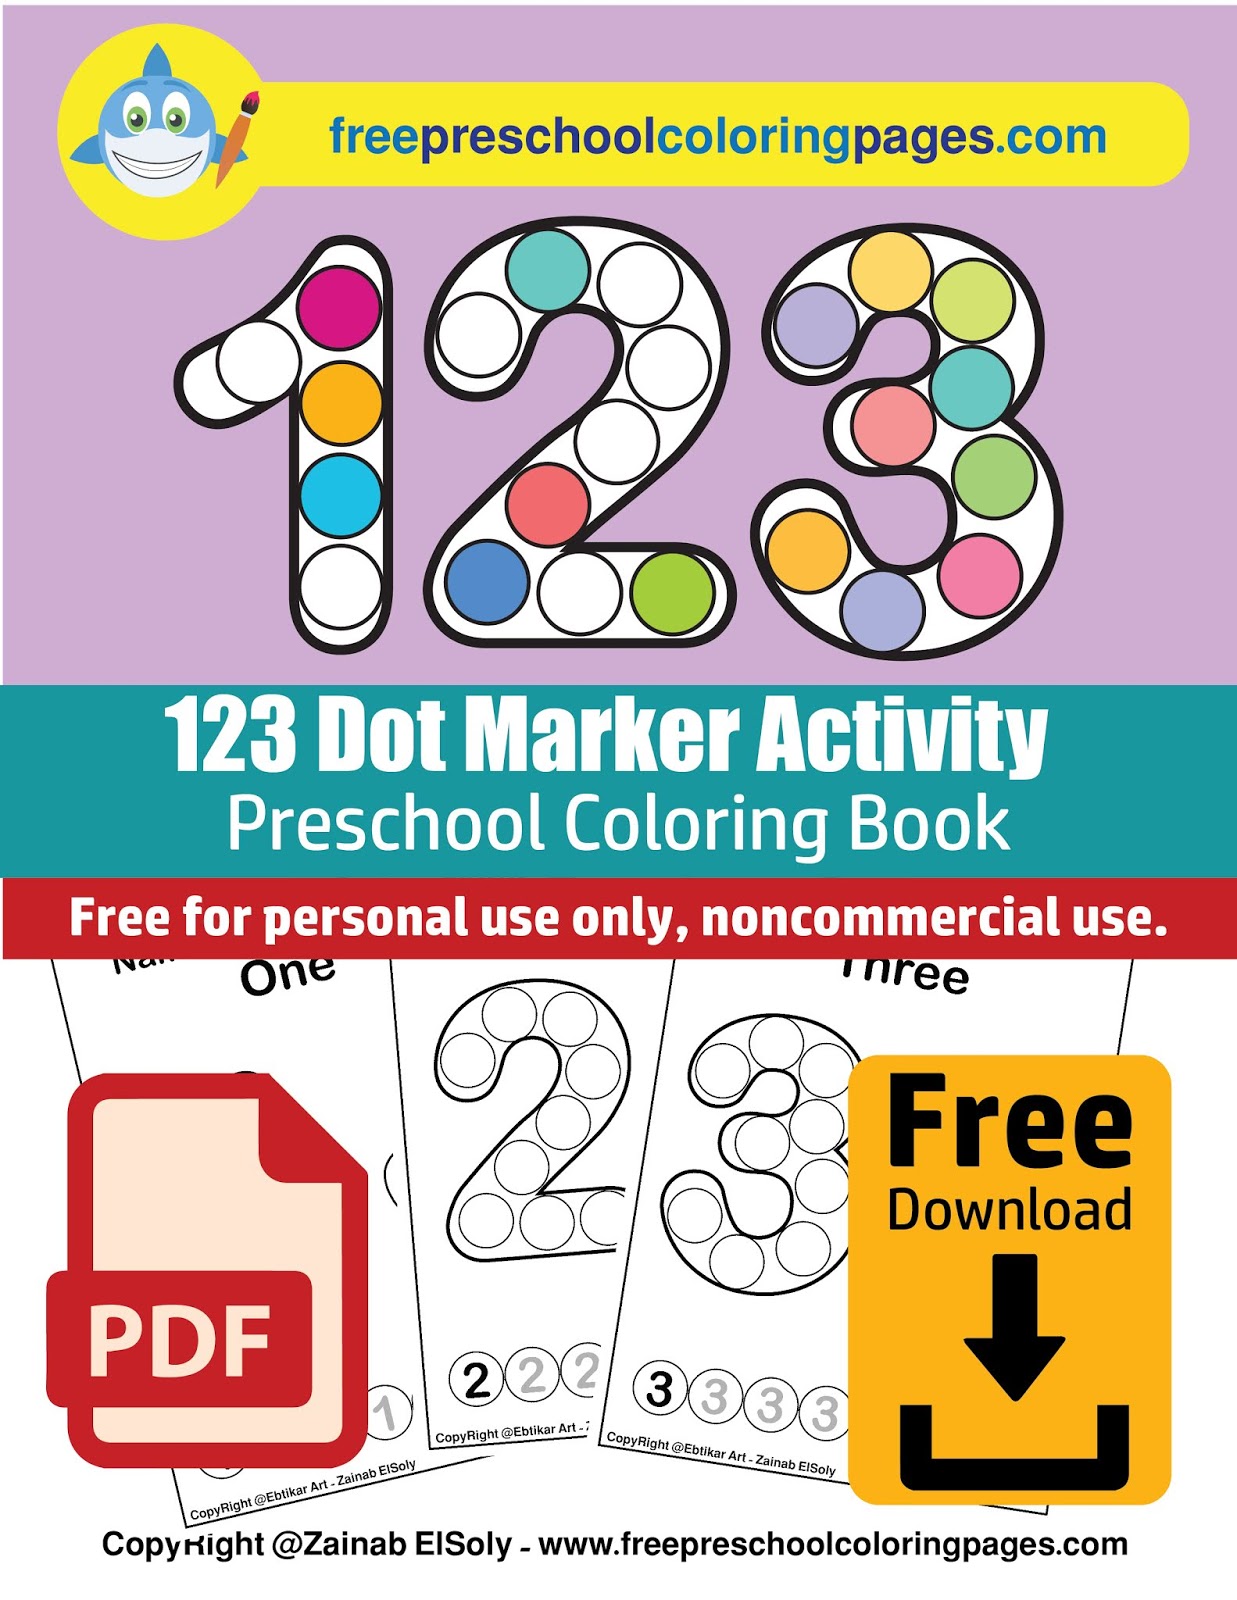 Download Numbers 123 Count Apples Dot Activity Free Preschool Coloring Sheets